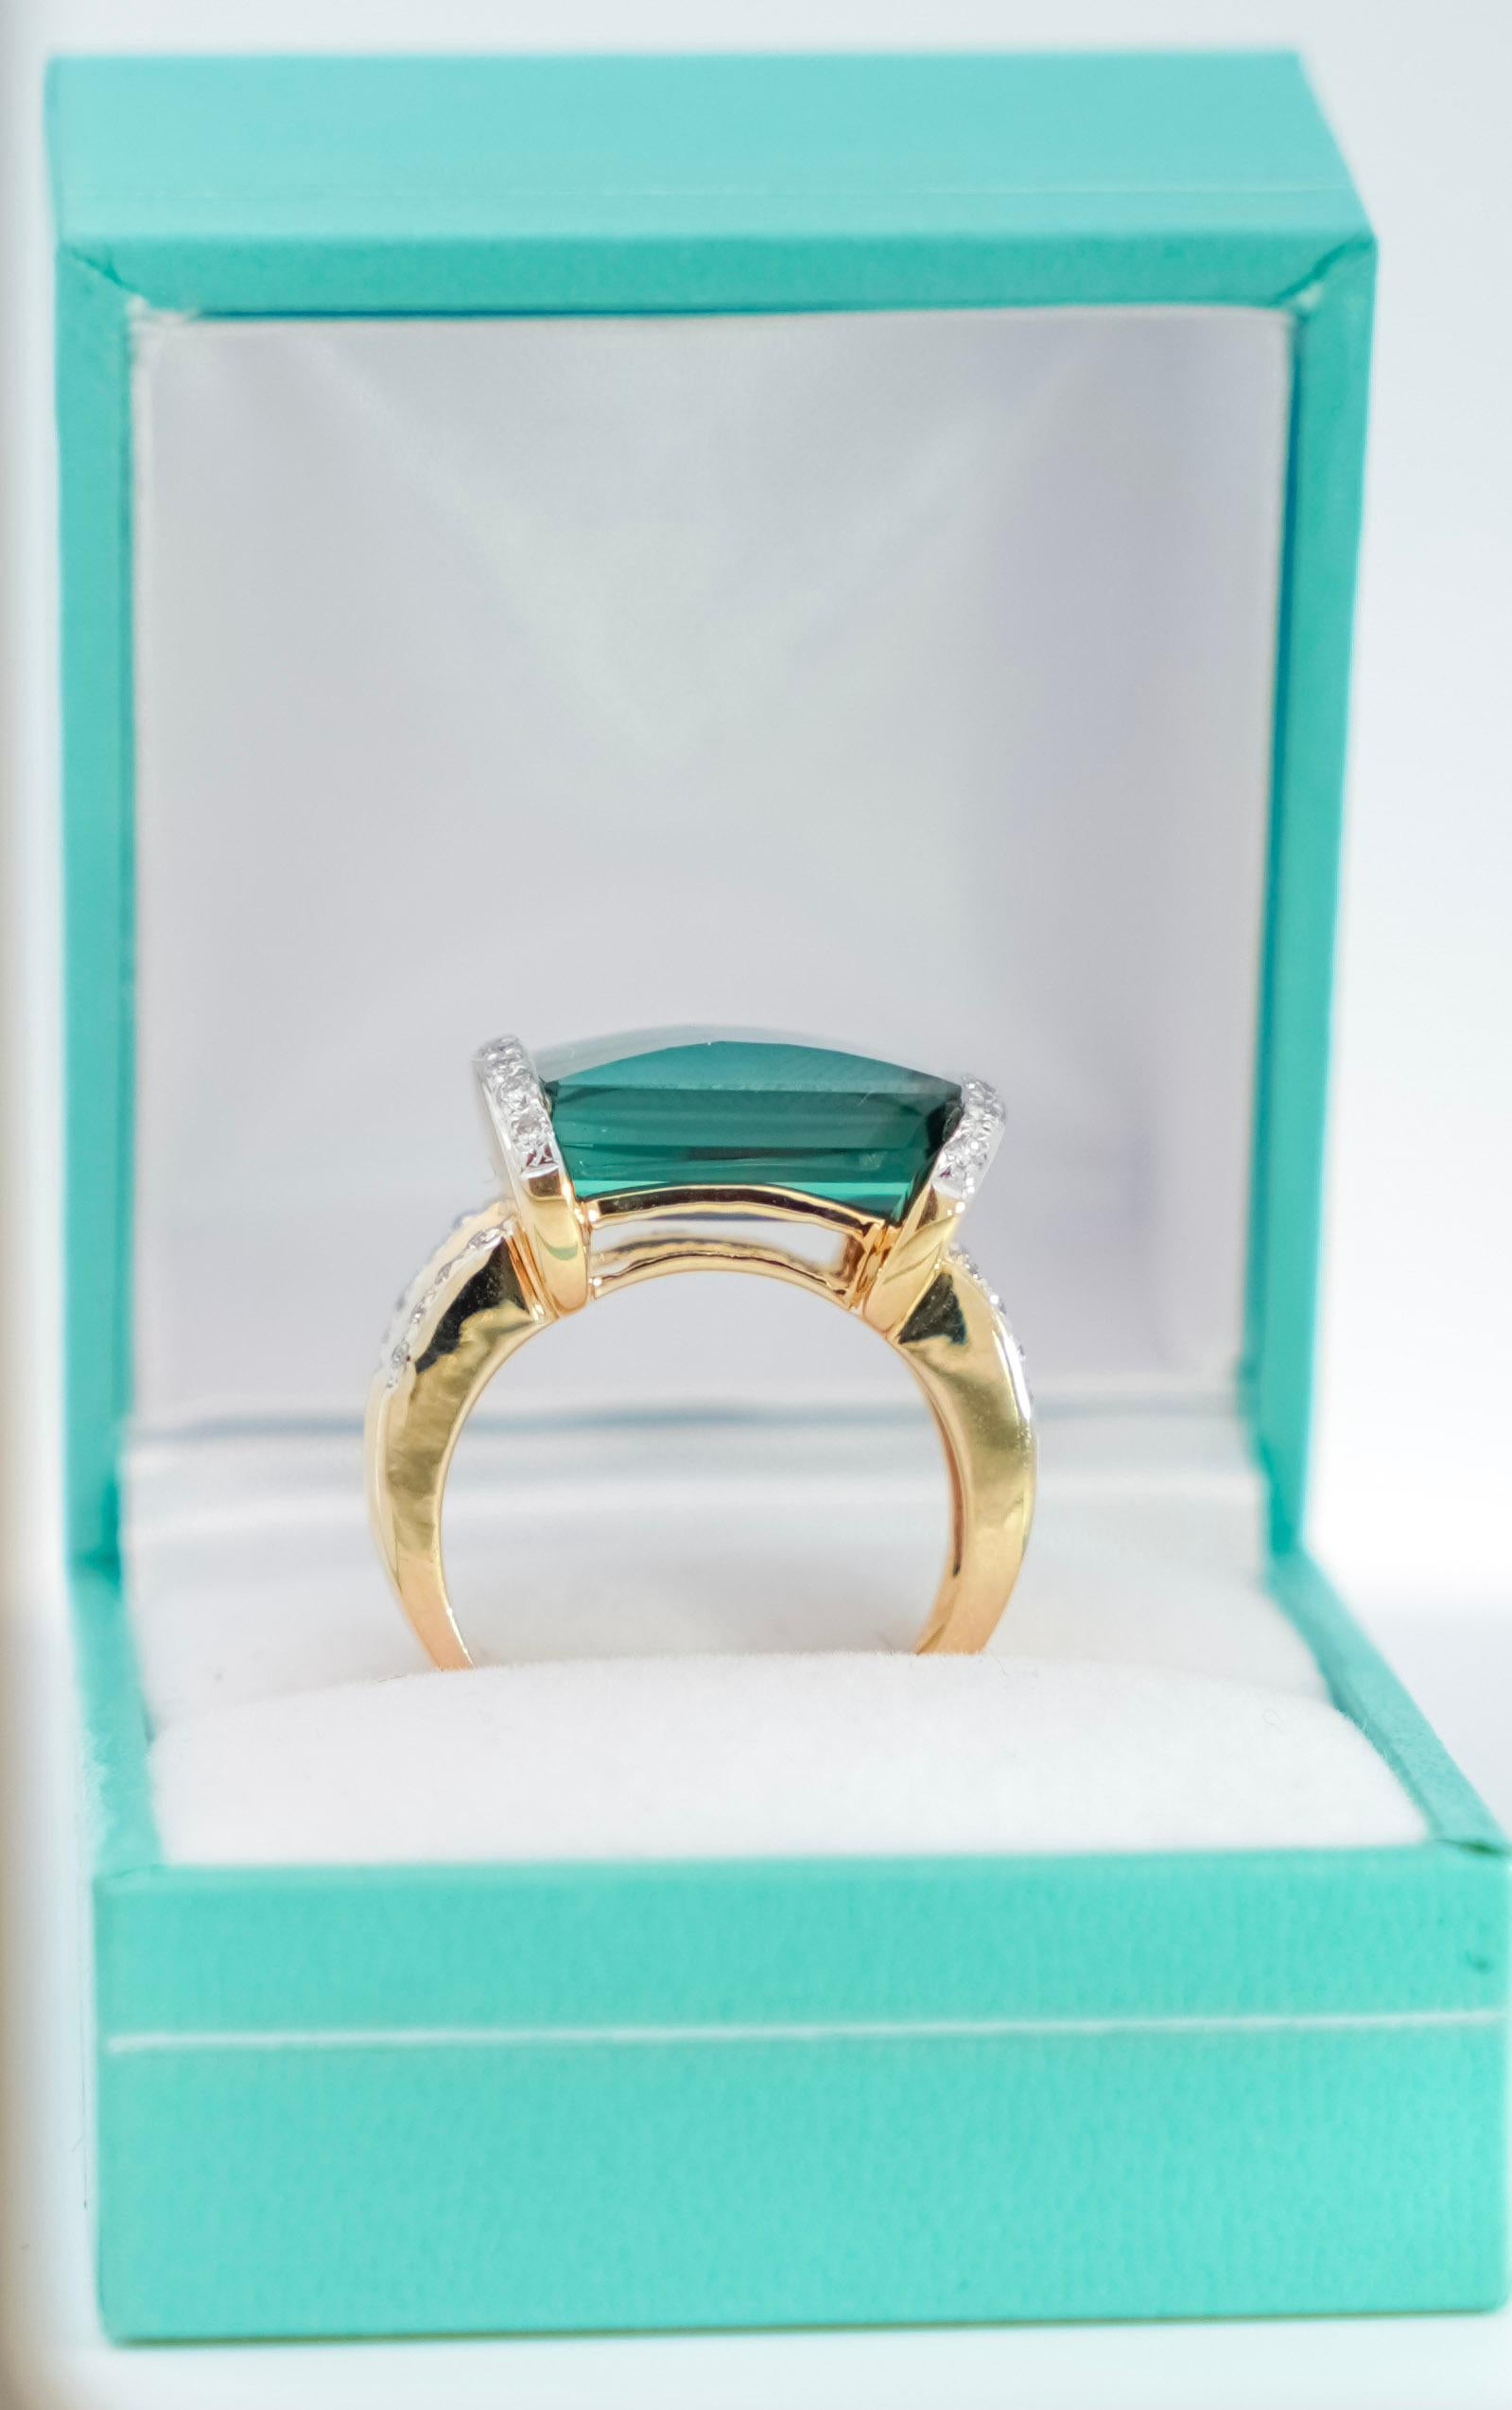 GIA Certified 18k two tone solid gold mounts an octagonal step-cut Tourmaline with round-cut diamond side stones. Centering a Blue-Green Tourmaline with charming facets that dazzle as the ring moves. Half bezel set, with a masterfully carved gold